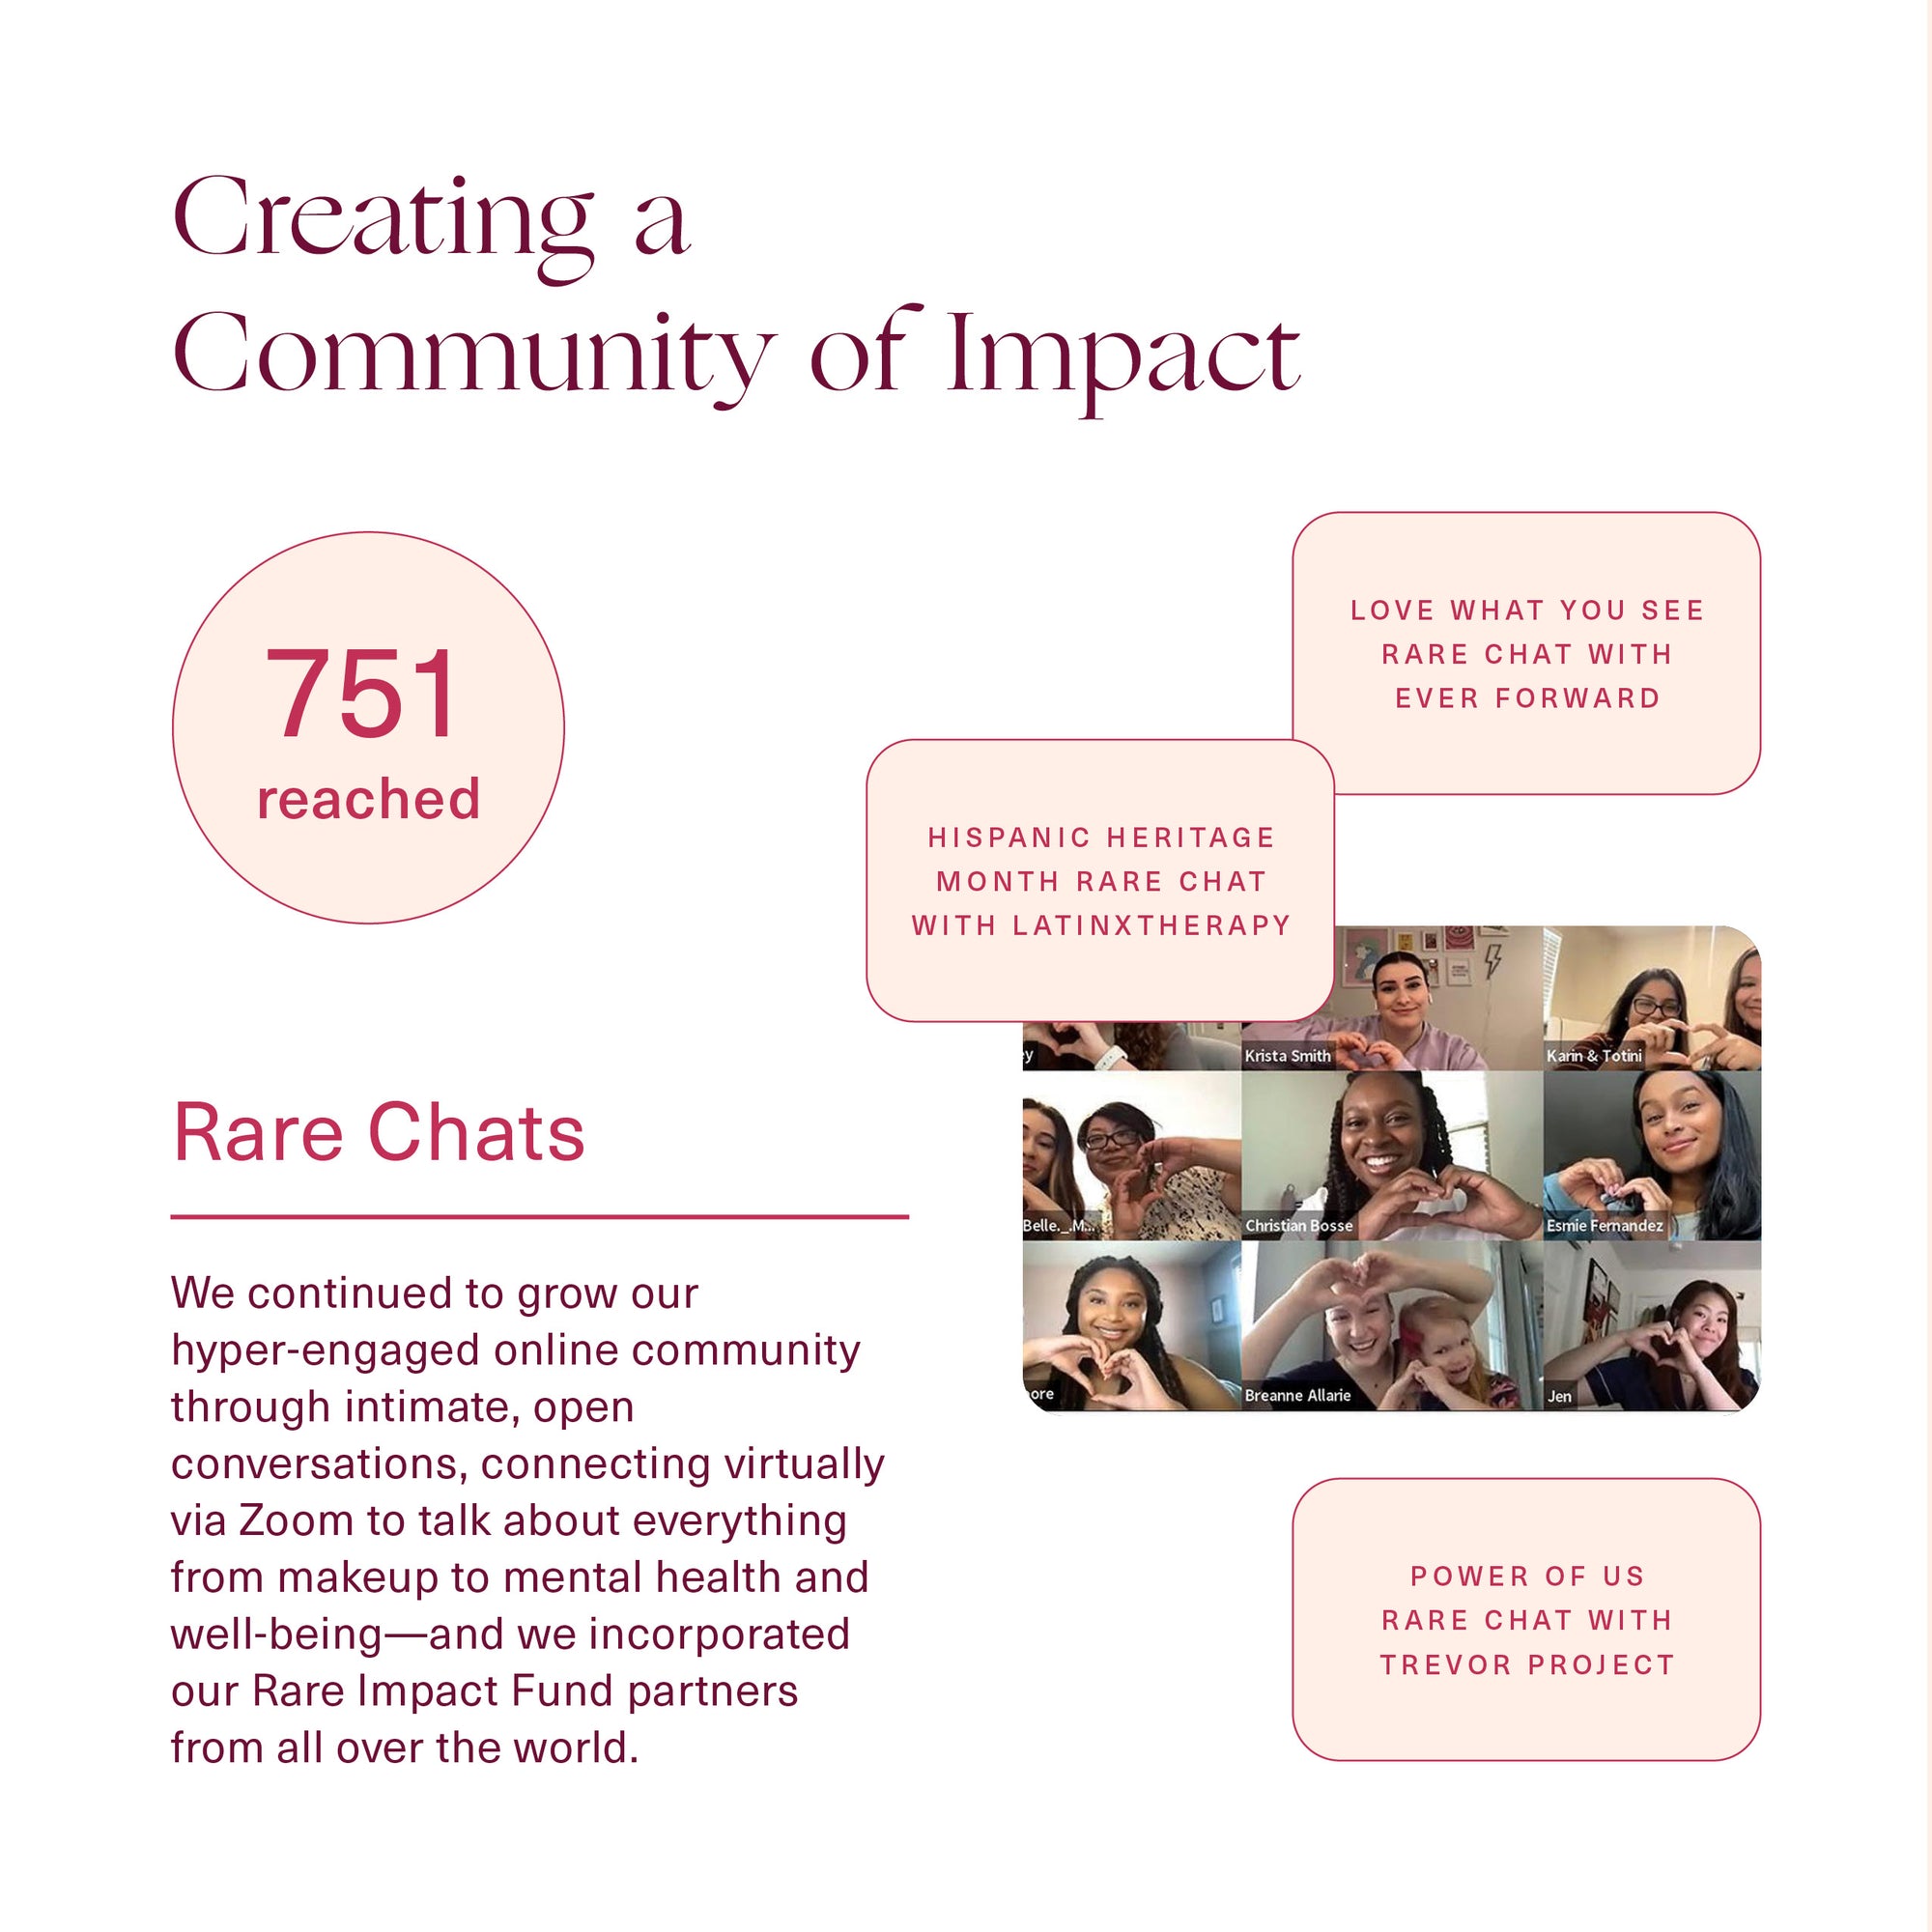 Creating a community of Impact - 751 reached